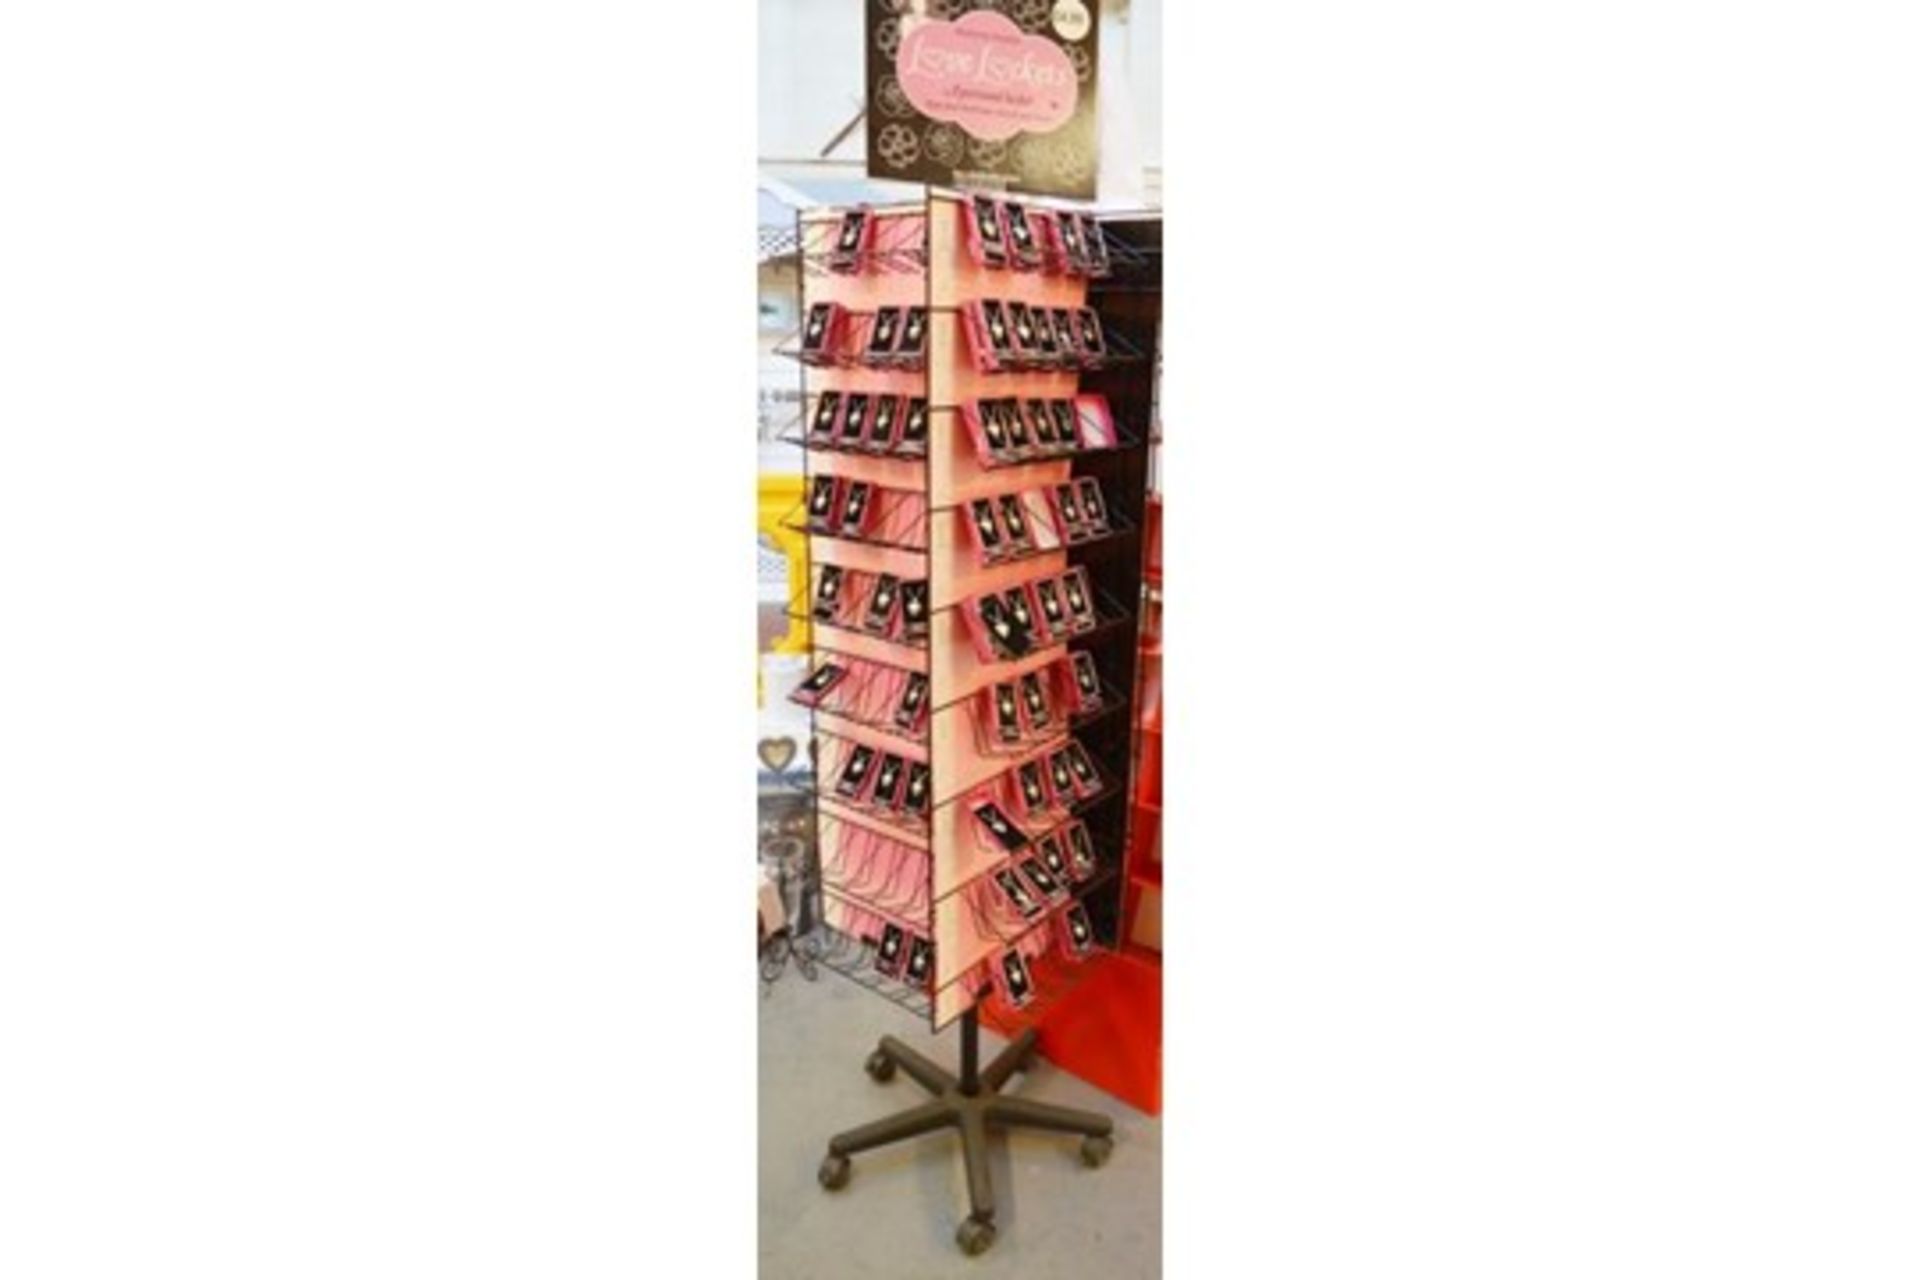 27 x Retail Carousel Display Stands With Approximately 2,800 Items of Resale Stock - Includes - Image 13 of 61